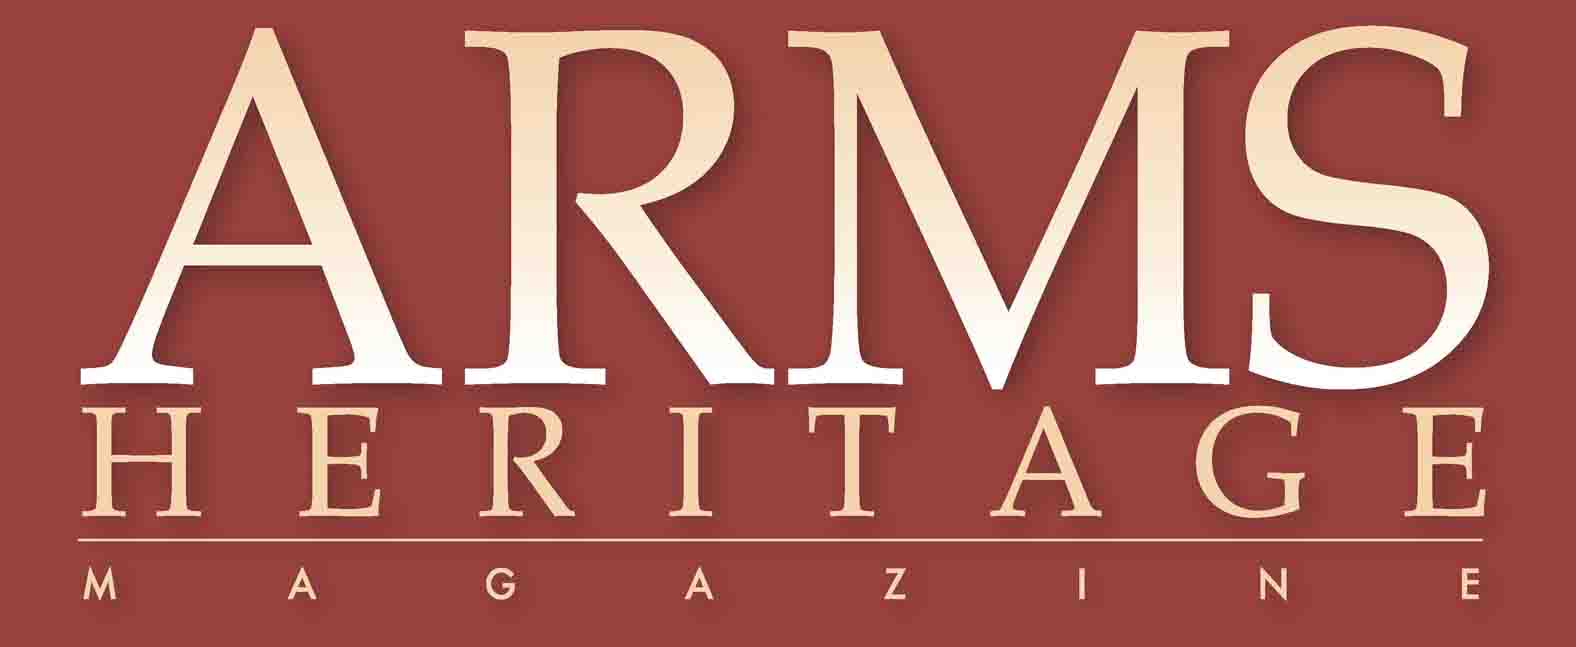 ARMS HERITAGE MAGAZINE - Volume 2, All Six Issues - GB-img-0